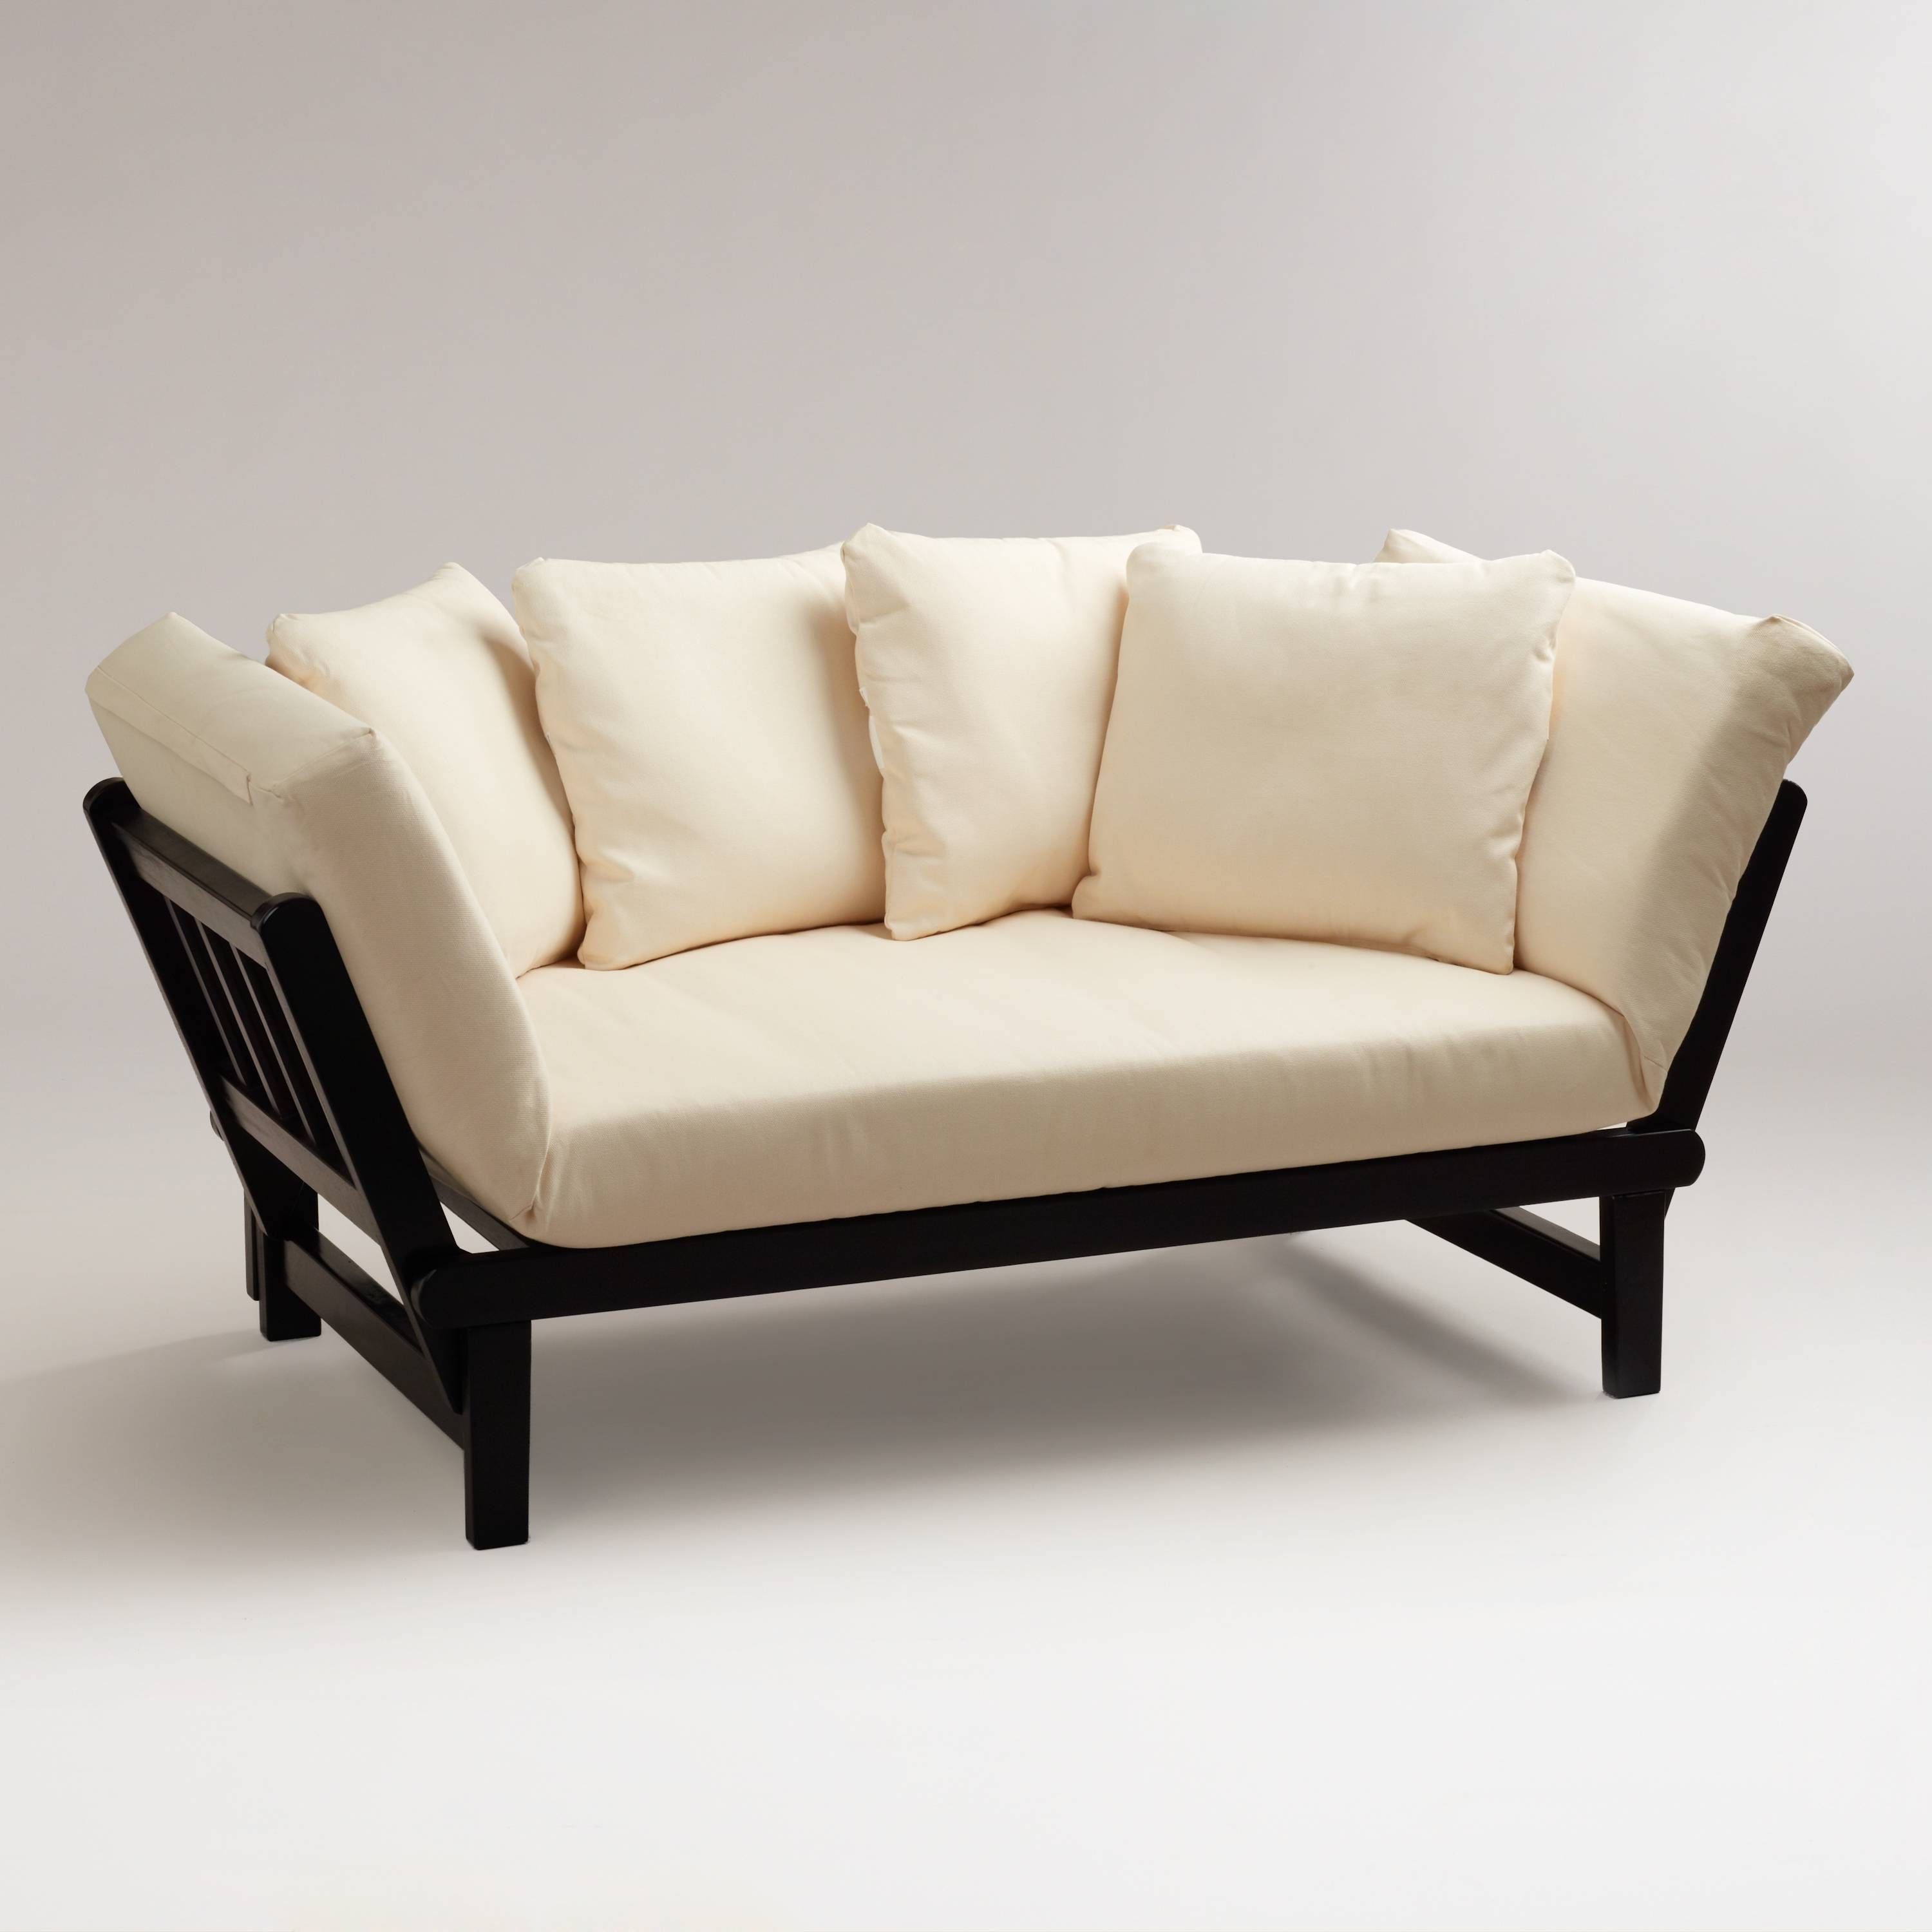 Studio Day Sofa | World Market Throughout Sofa Day Beds (View 4 of 30)